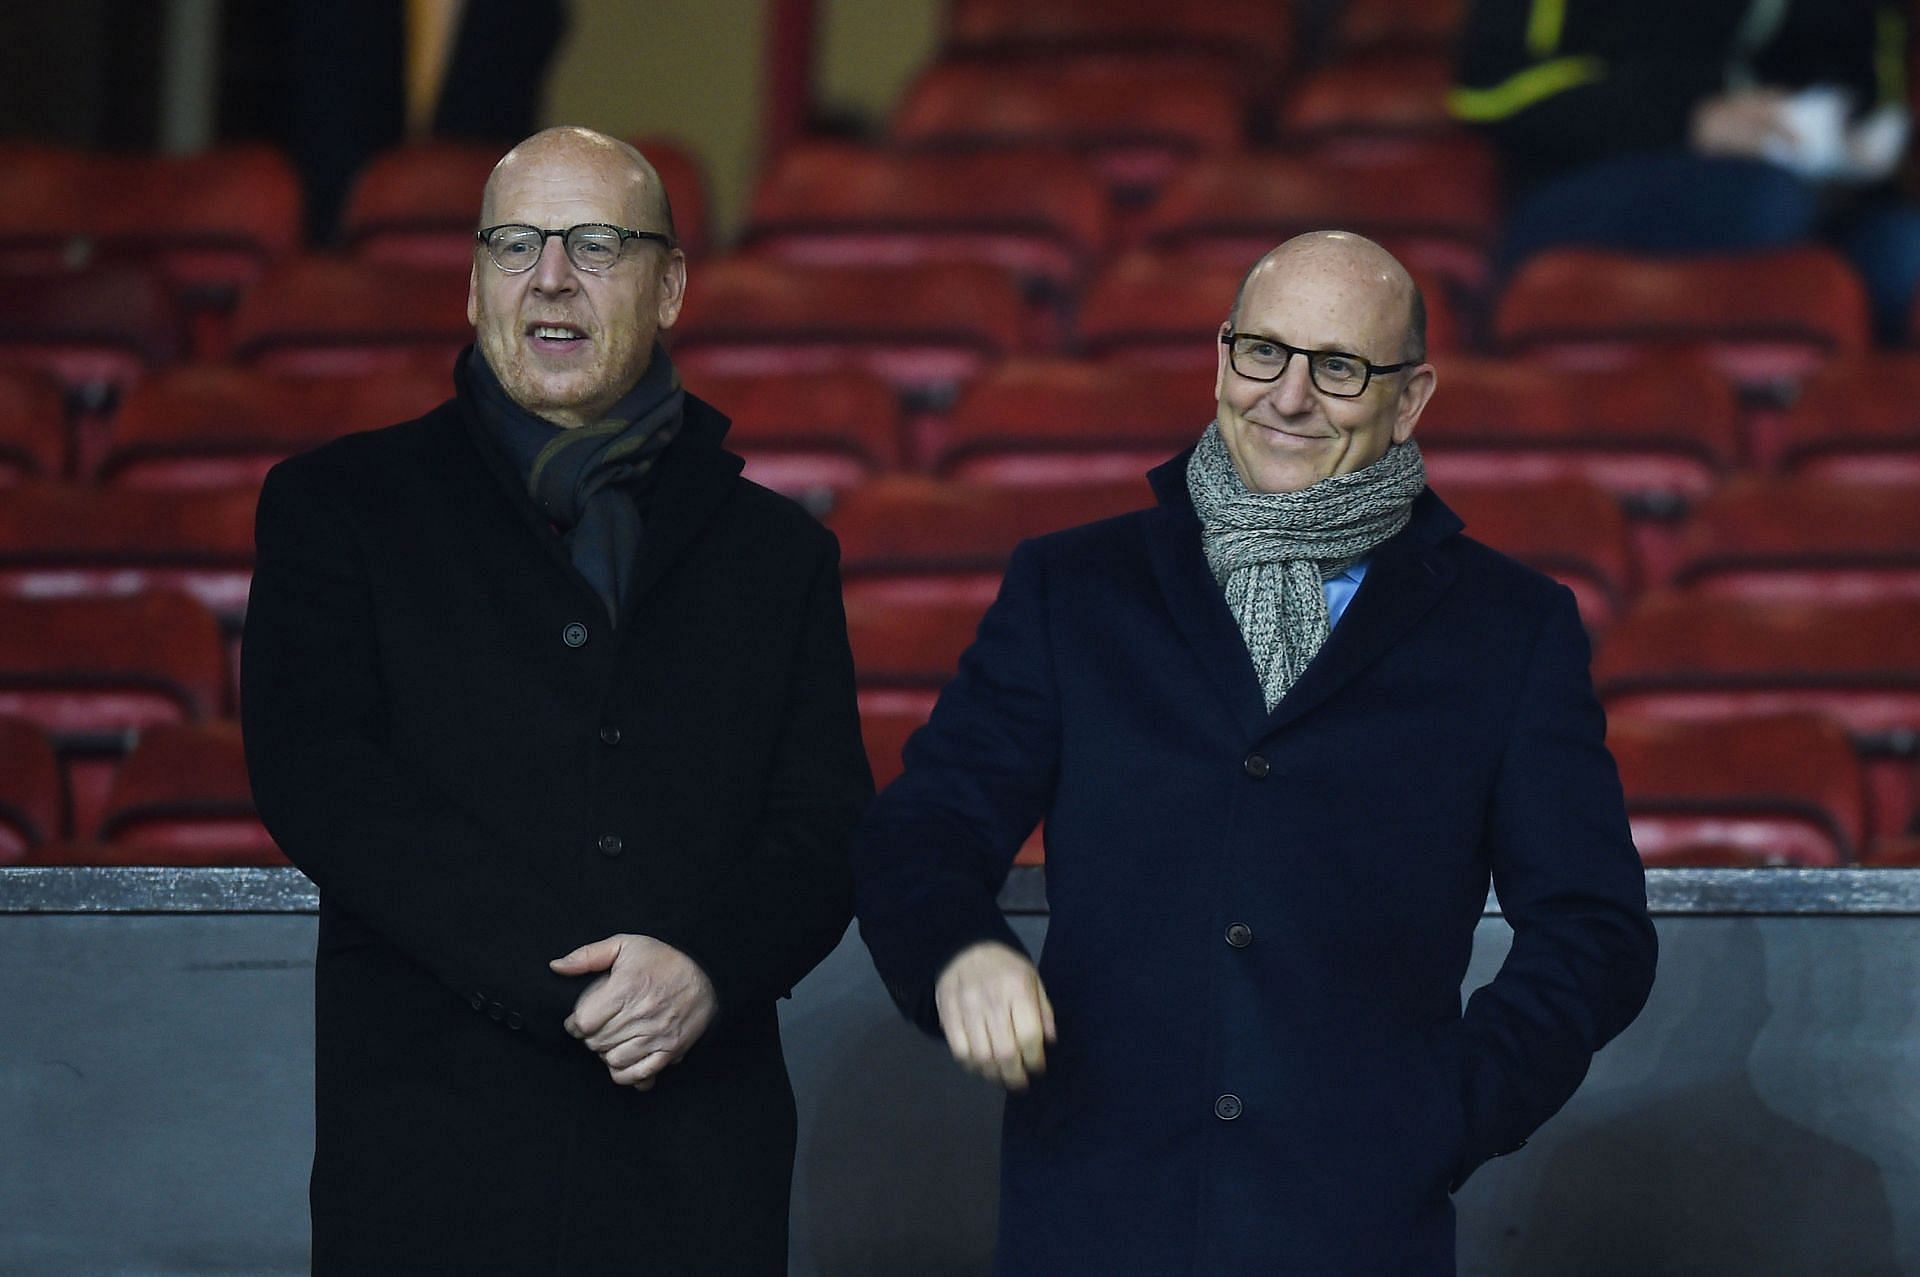 Manchester United owners, the Glazers, are interested in buying a team in the IPL